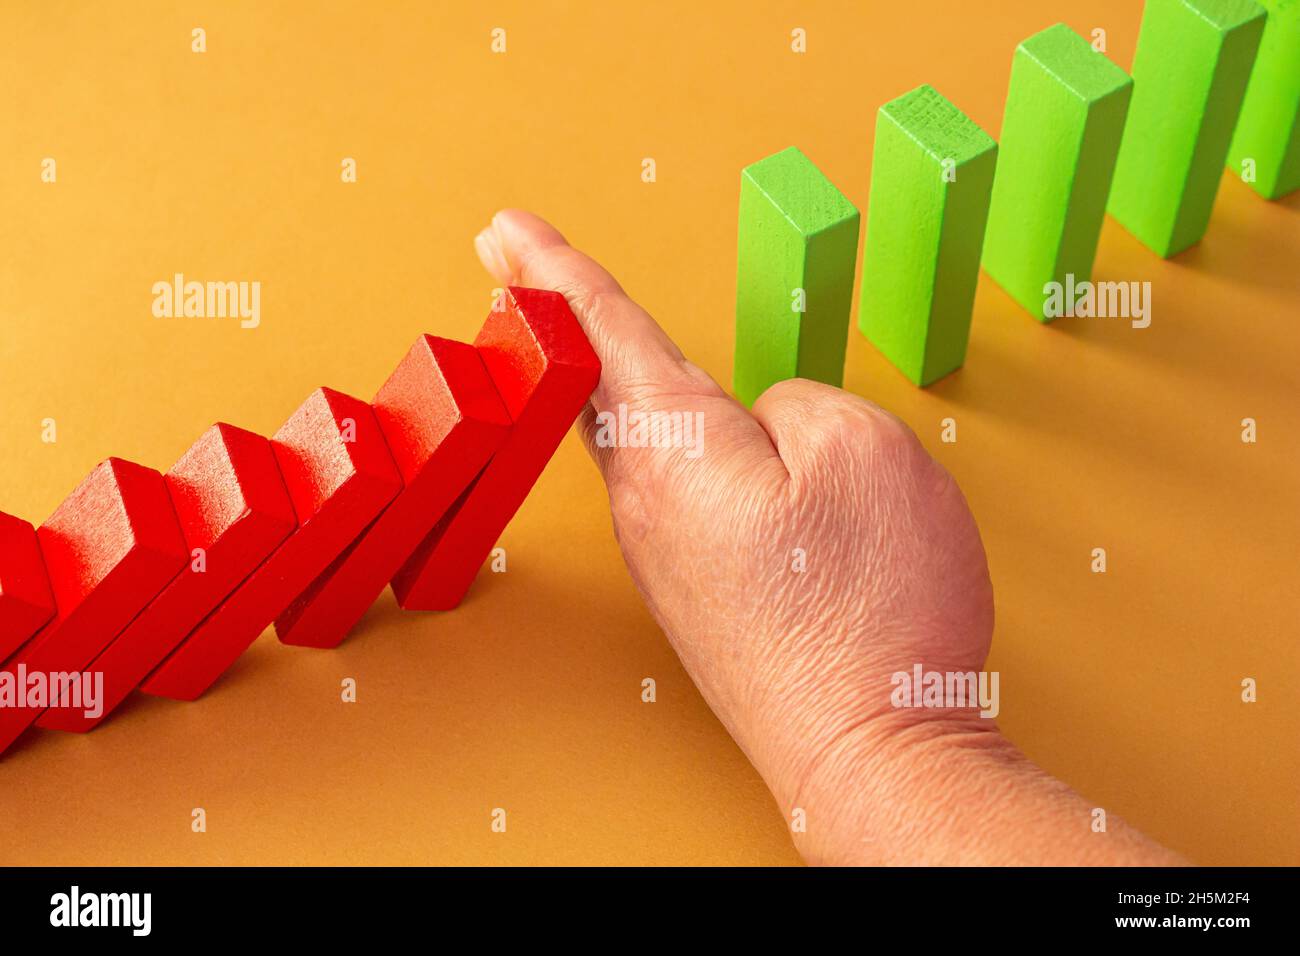 Close up business woman hand stopping wooden blocks from falling. Concept of risk and crisis management in business life. Stock Photo